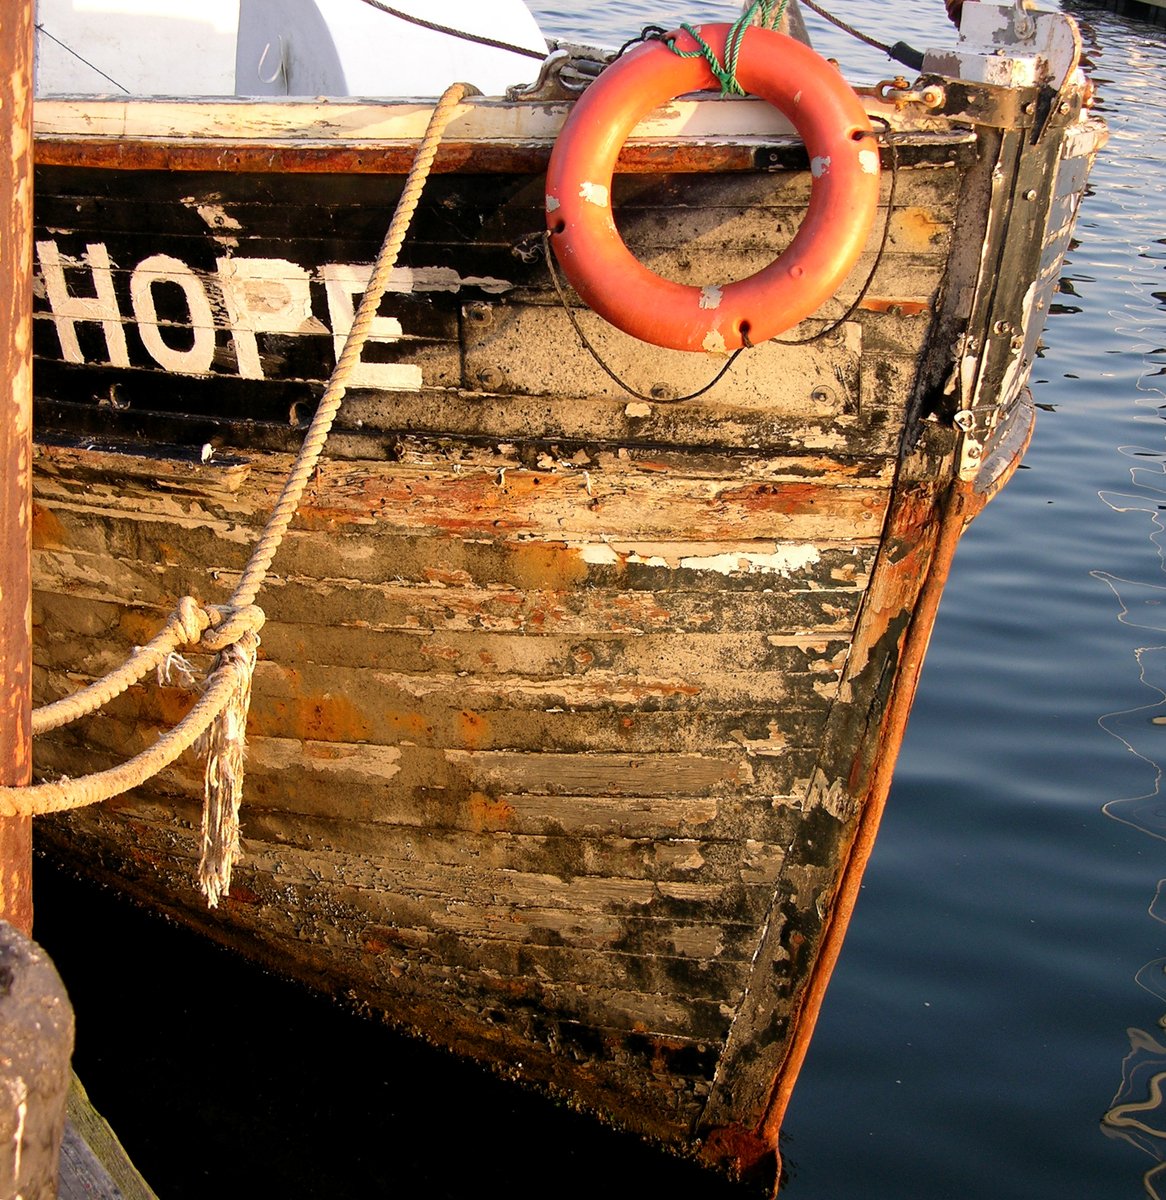 there is a orange life preserver attached to an old wooden boat